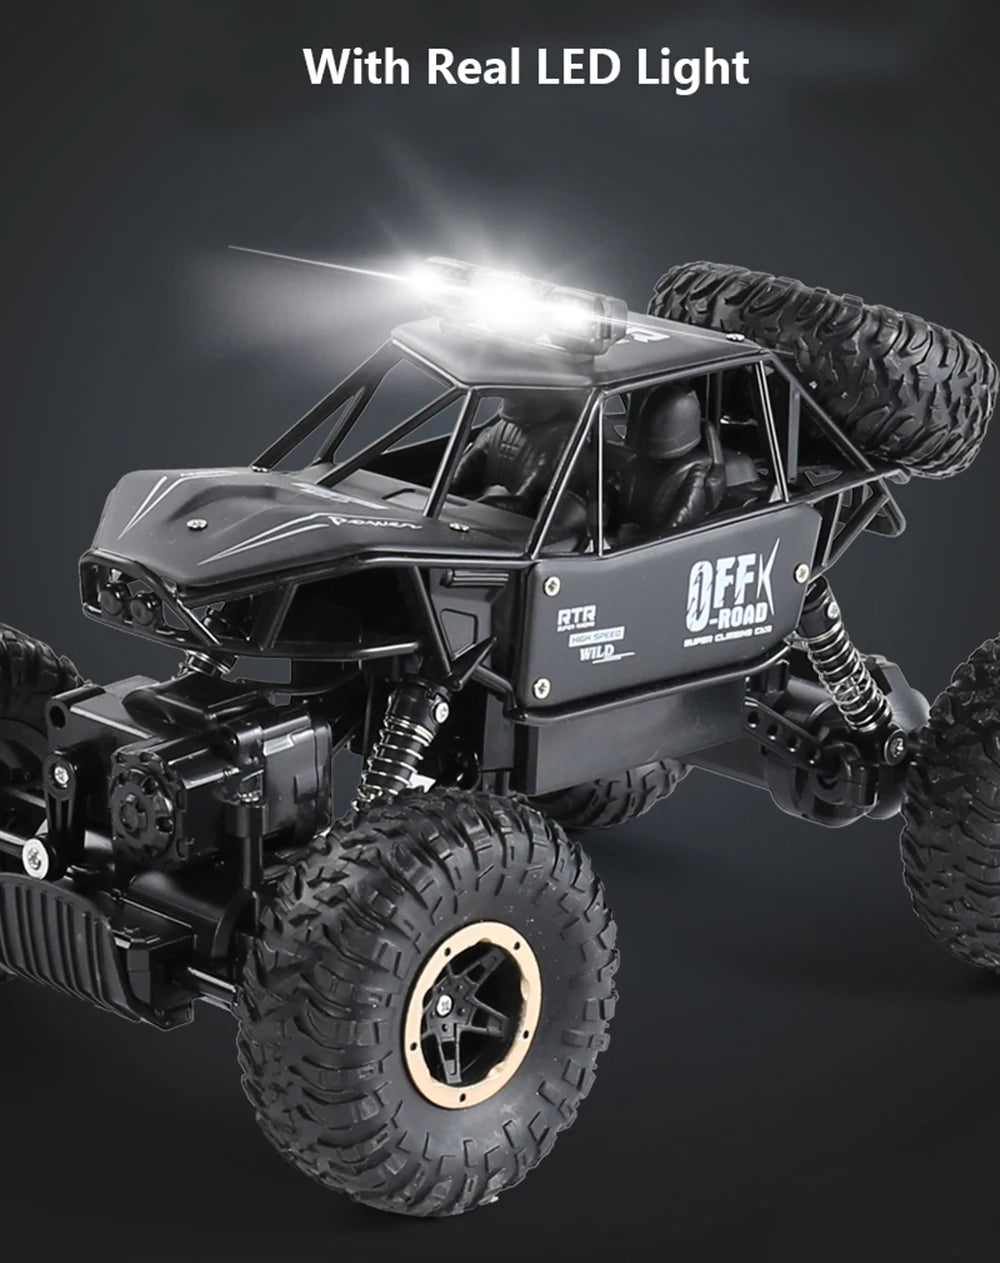 the model 5514 is 4WD rock crawler rc car, it is with real